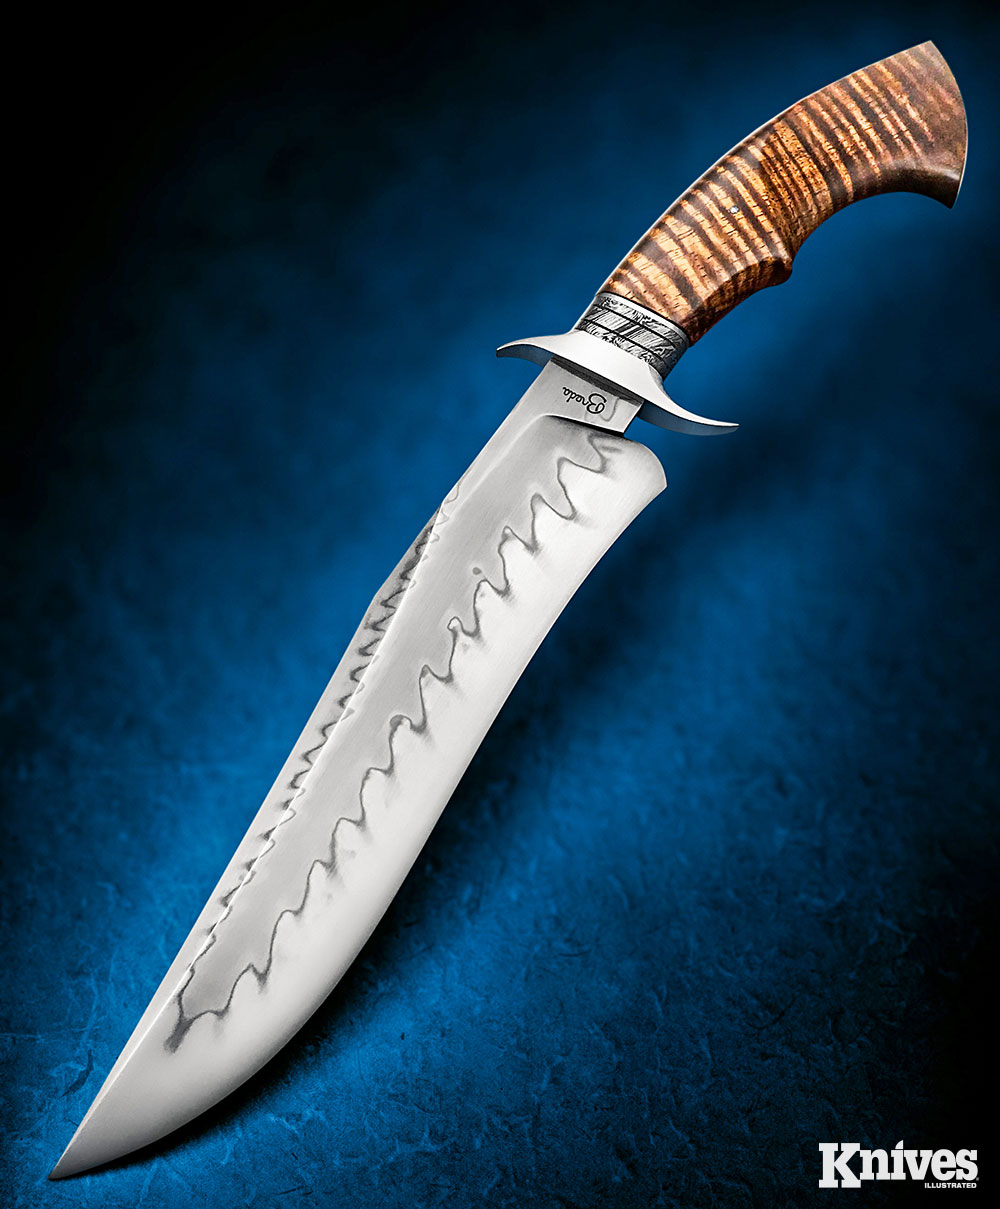 Meet the makers who keep the fighting bowie knife alive